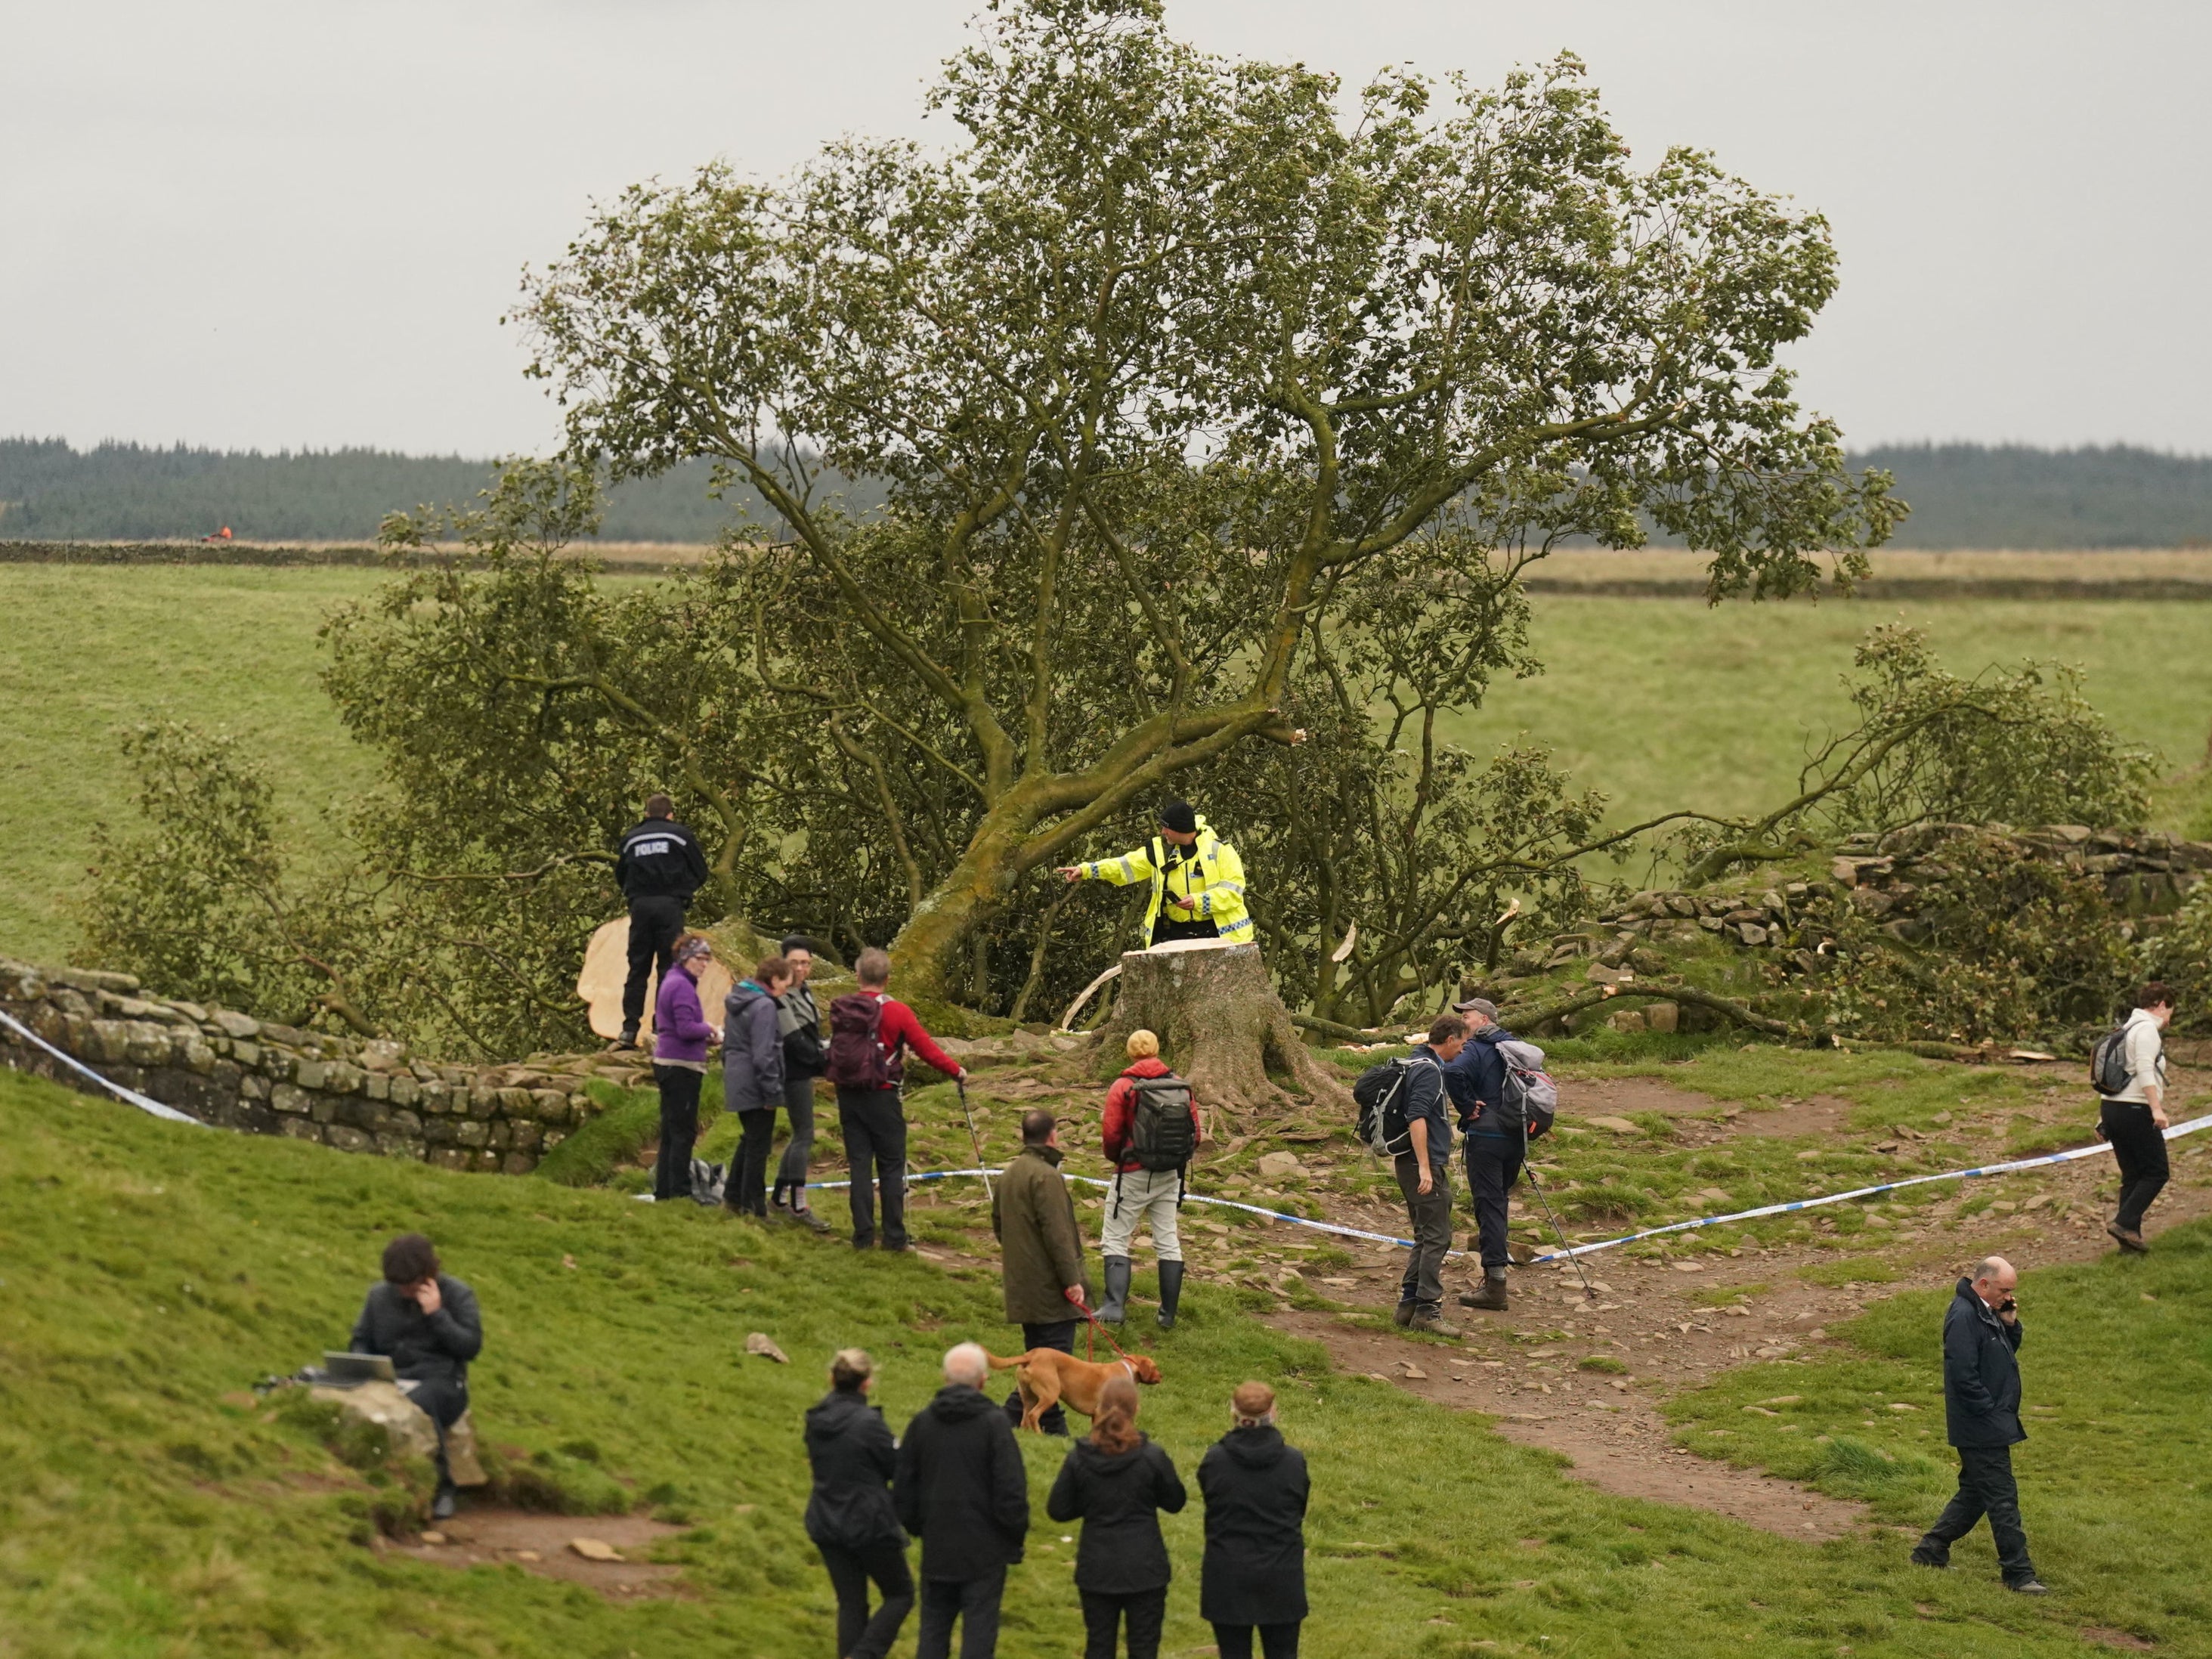 People look at the tree at Sycamore Gap, next to Hadrian's Wall, in Northumberland after it came down overnight